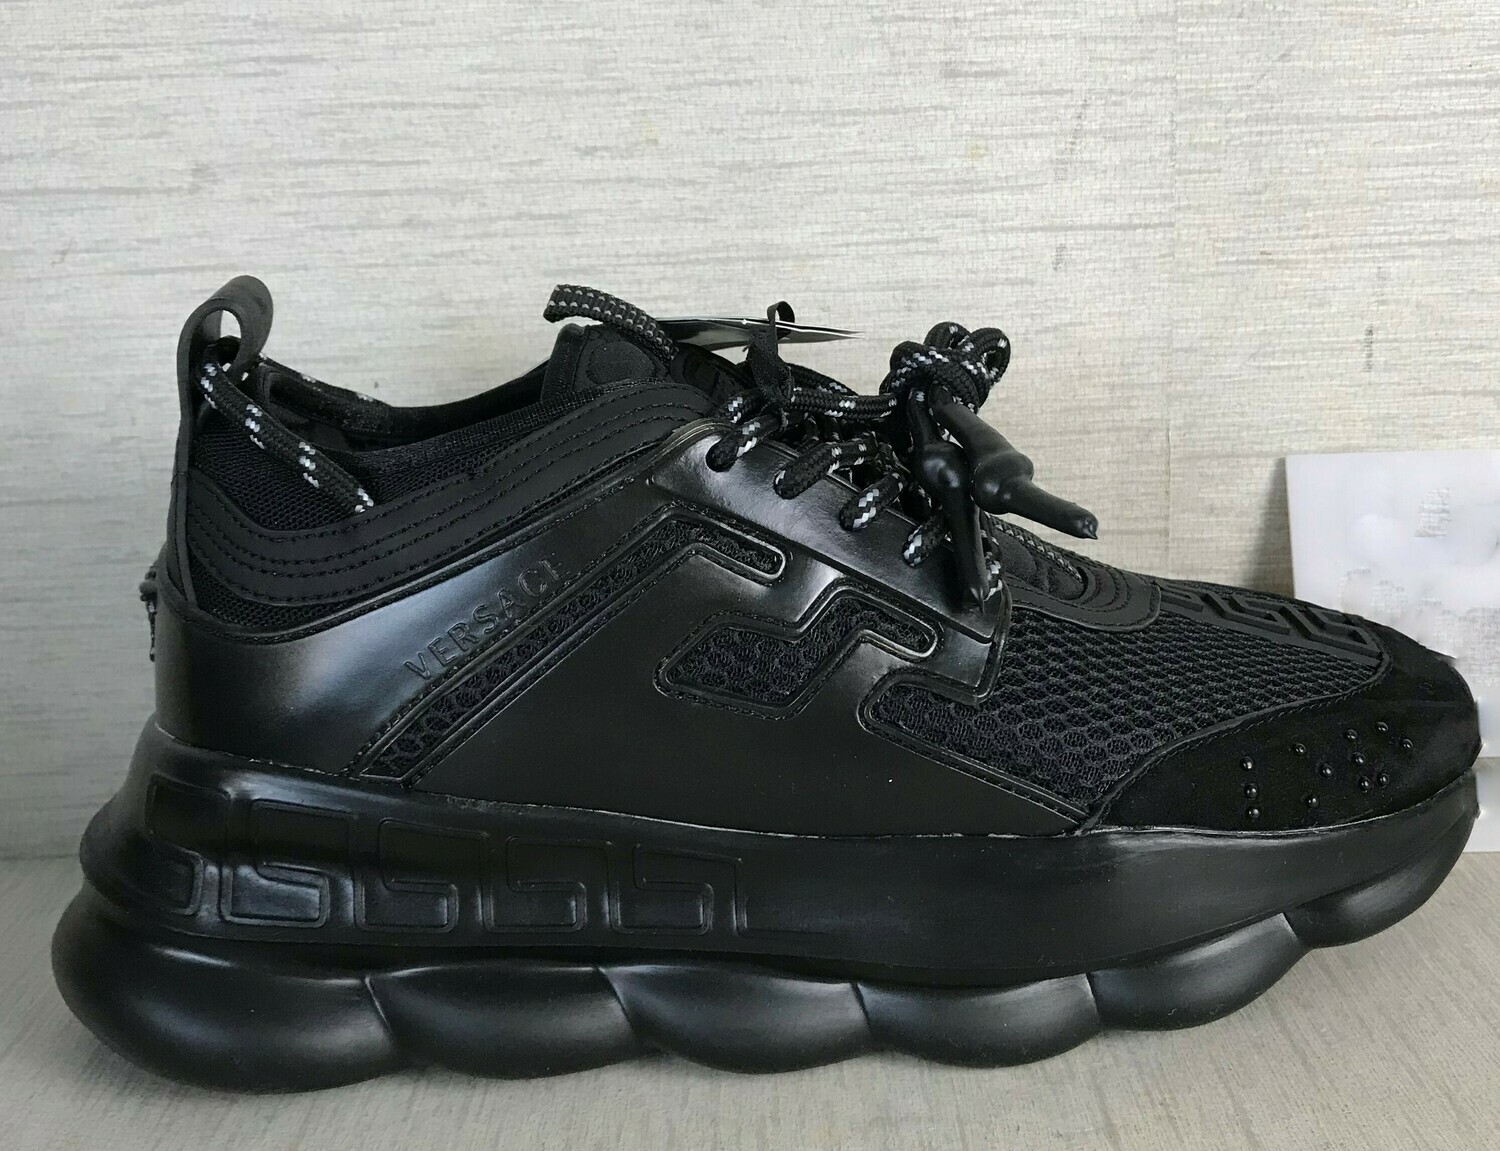 SNEAKERS VERSACE CHAIN REACTION TOTAL BLACK